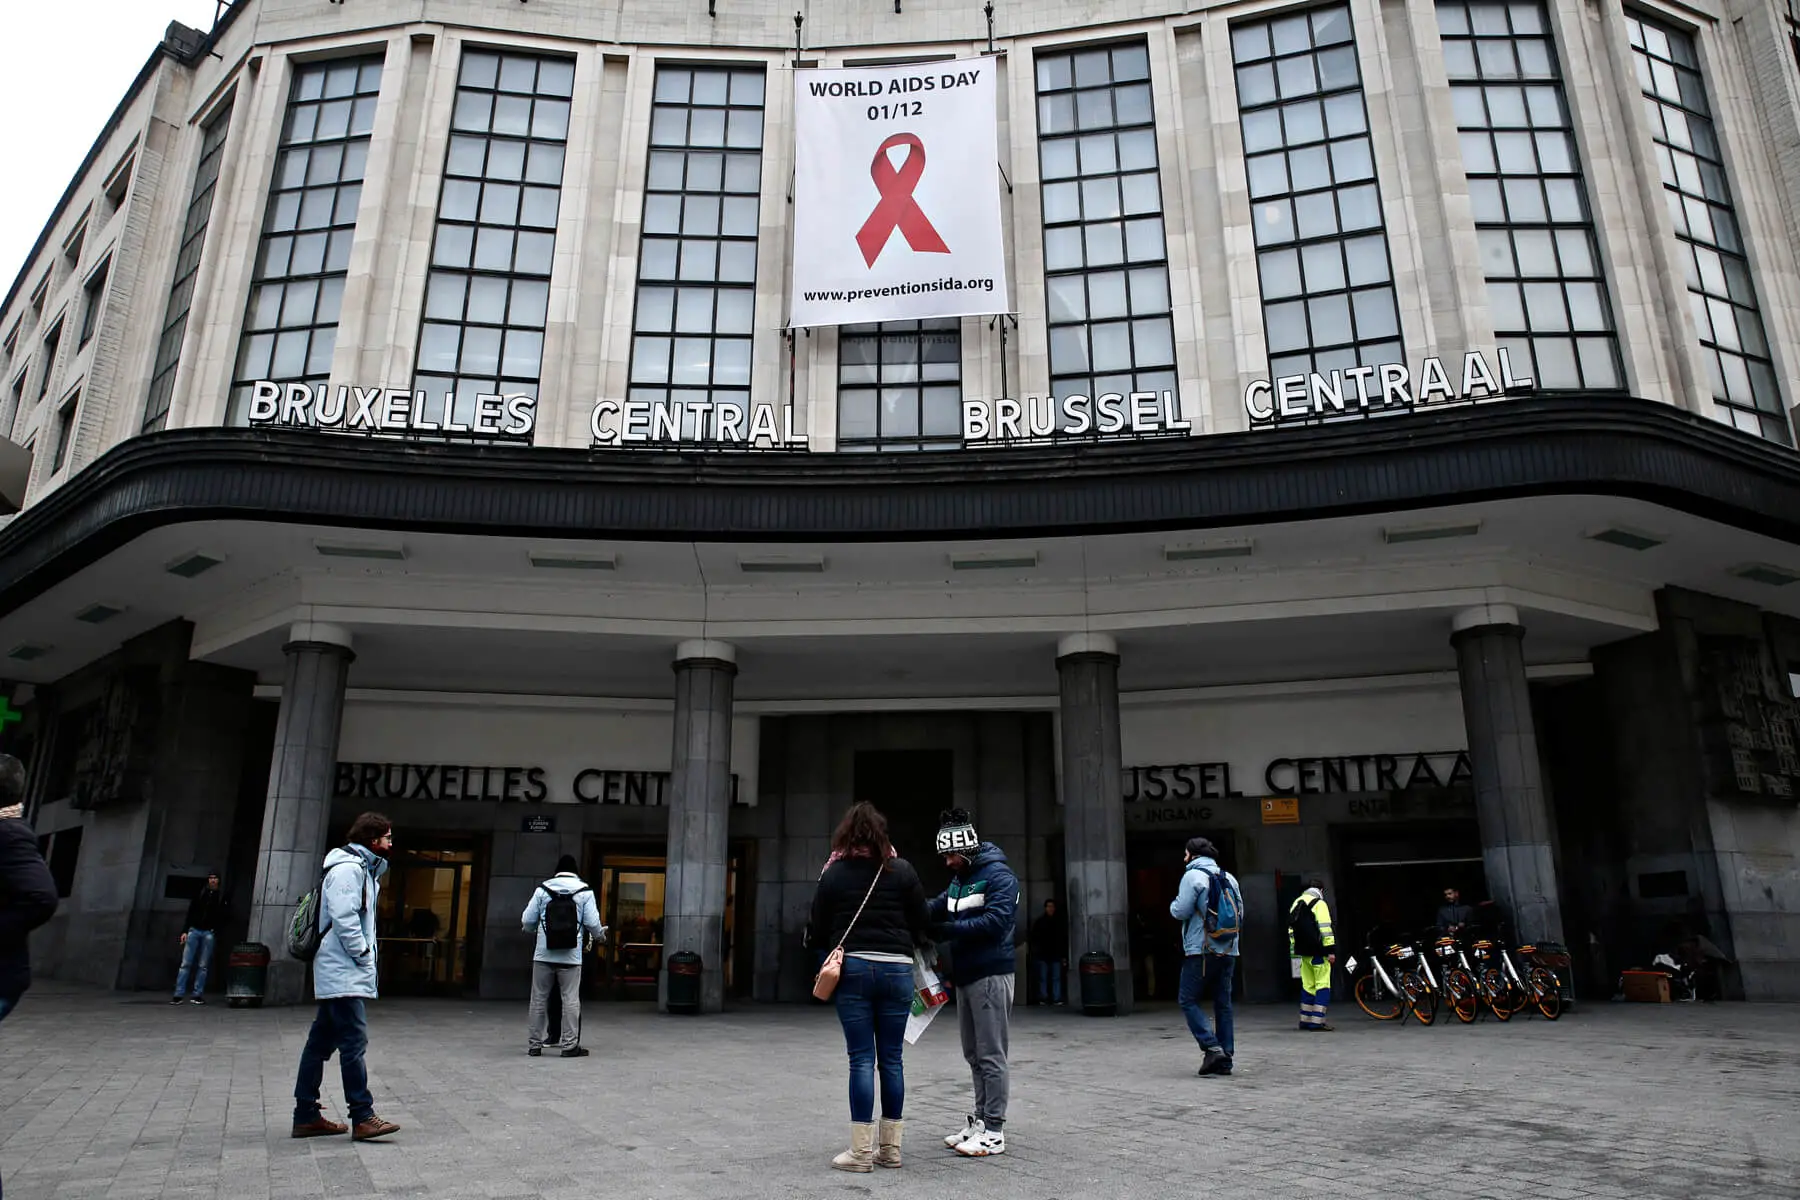 World AIDS Day campaign poster outside Brussels Central Station